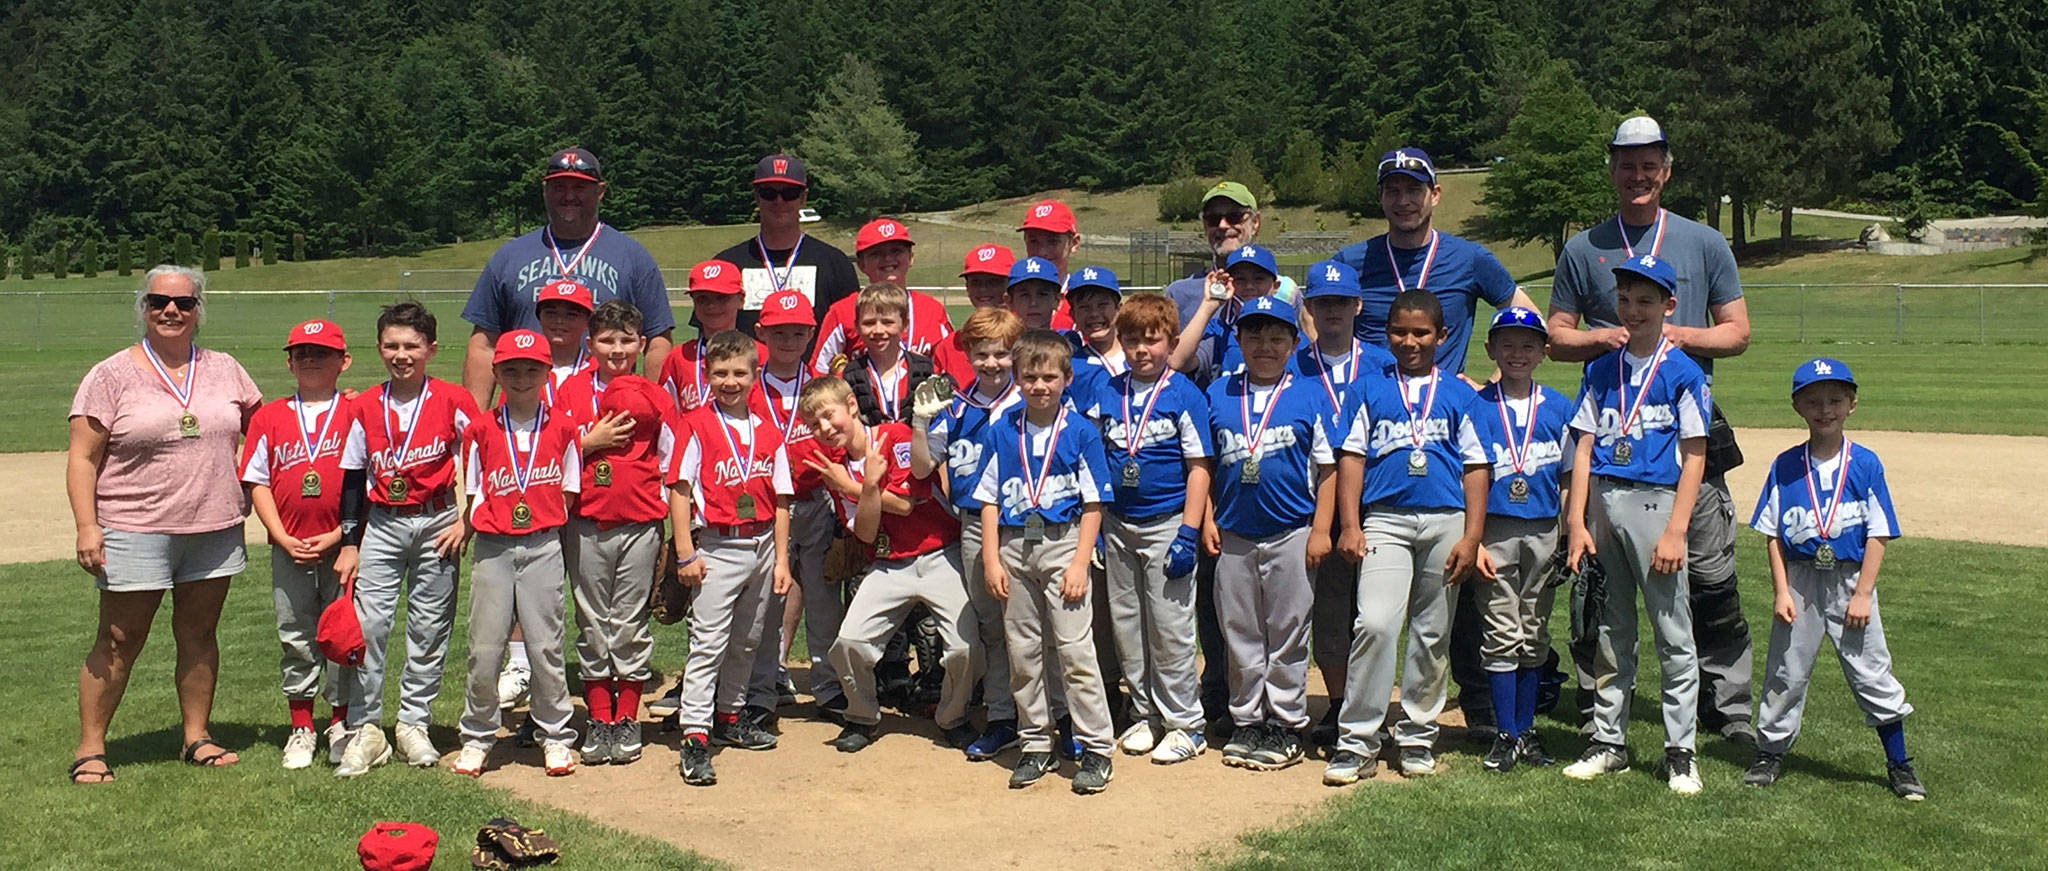 The South Whidbey Little League Nationals, left, and Dodgers show off their medals after competing in the championship game of the Henry Pope Tournament. The Nationals defeated the Dodgers 3-1 for the title. (Submitted photo)